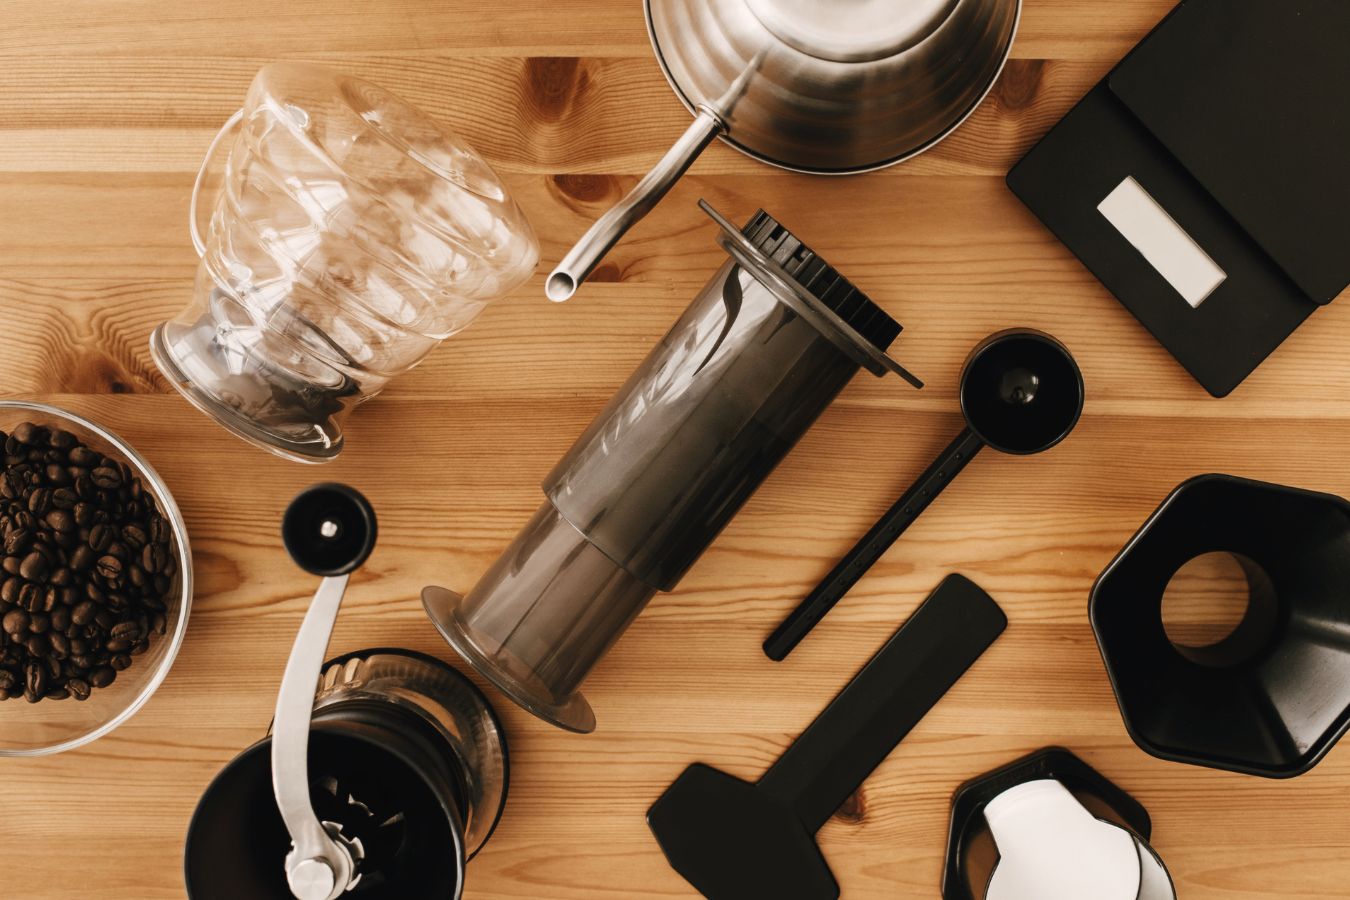 Aeropress Vs French Press - Which Is Better?